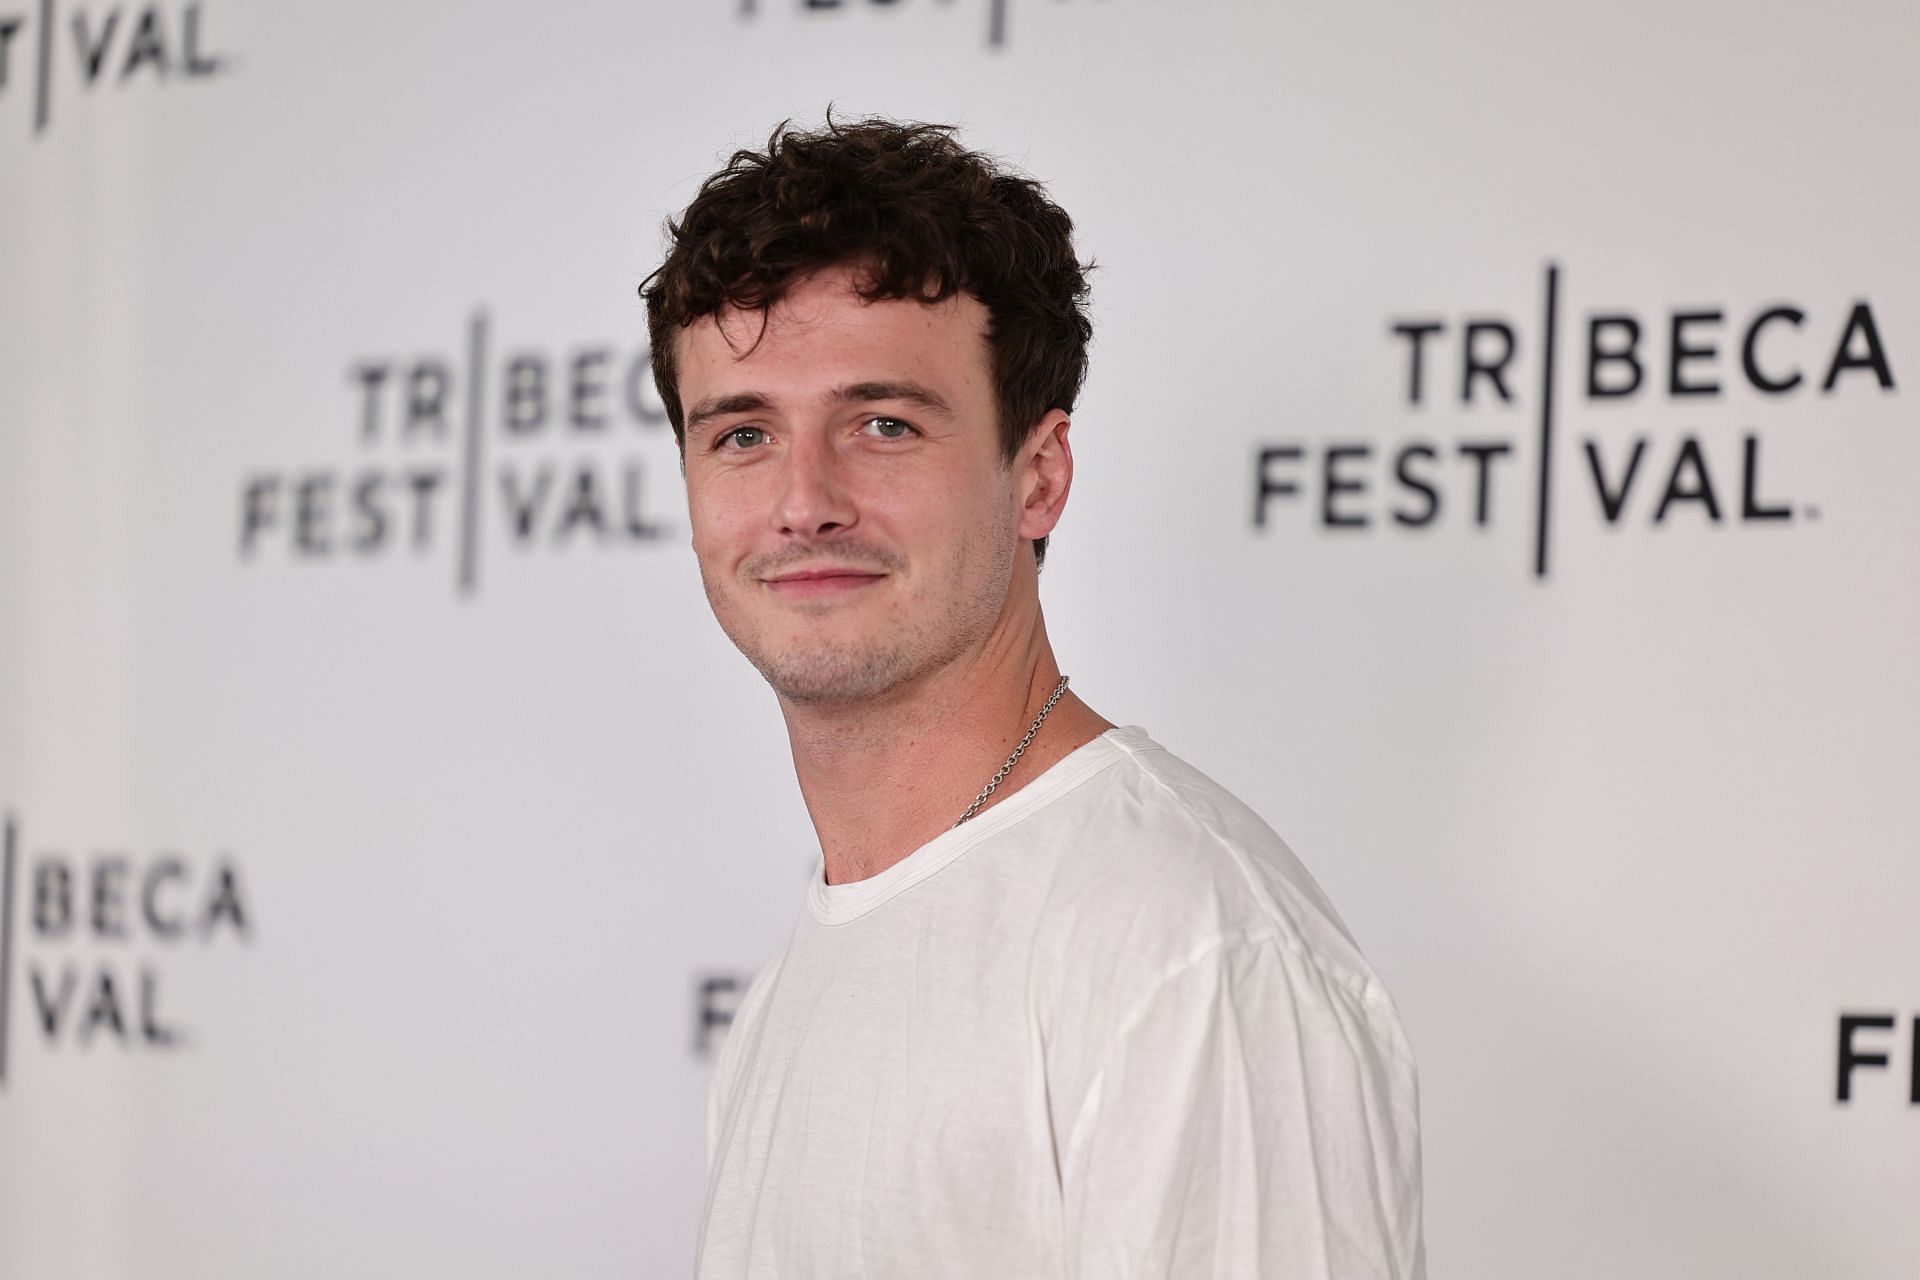 Miche&aacute;l Richardson as Joe (Photo by Jamie McCarthy/Getty Images for Tribeca Festival))